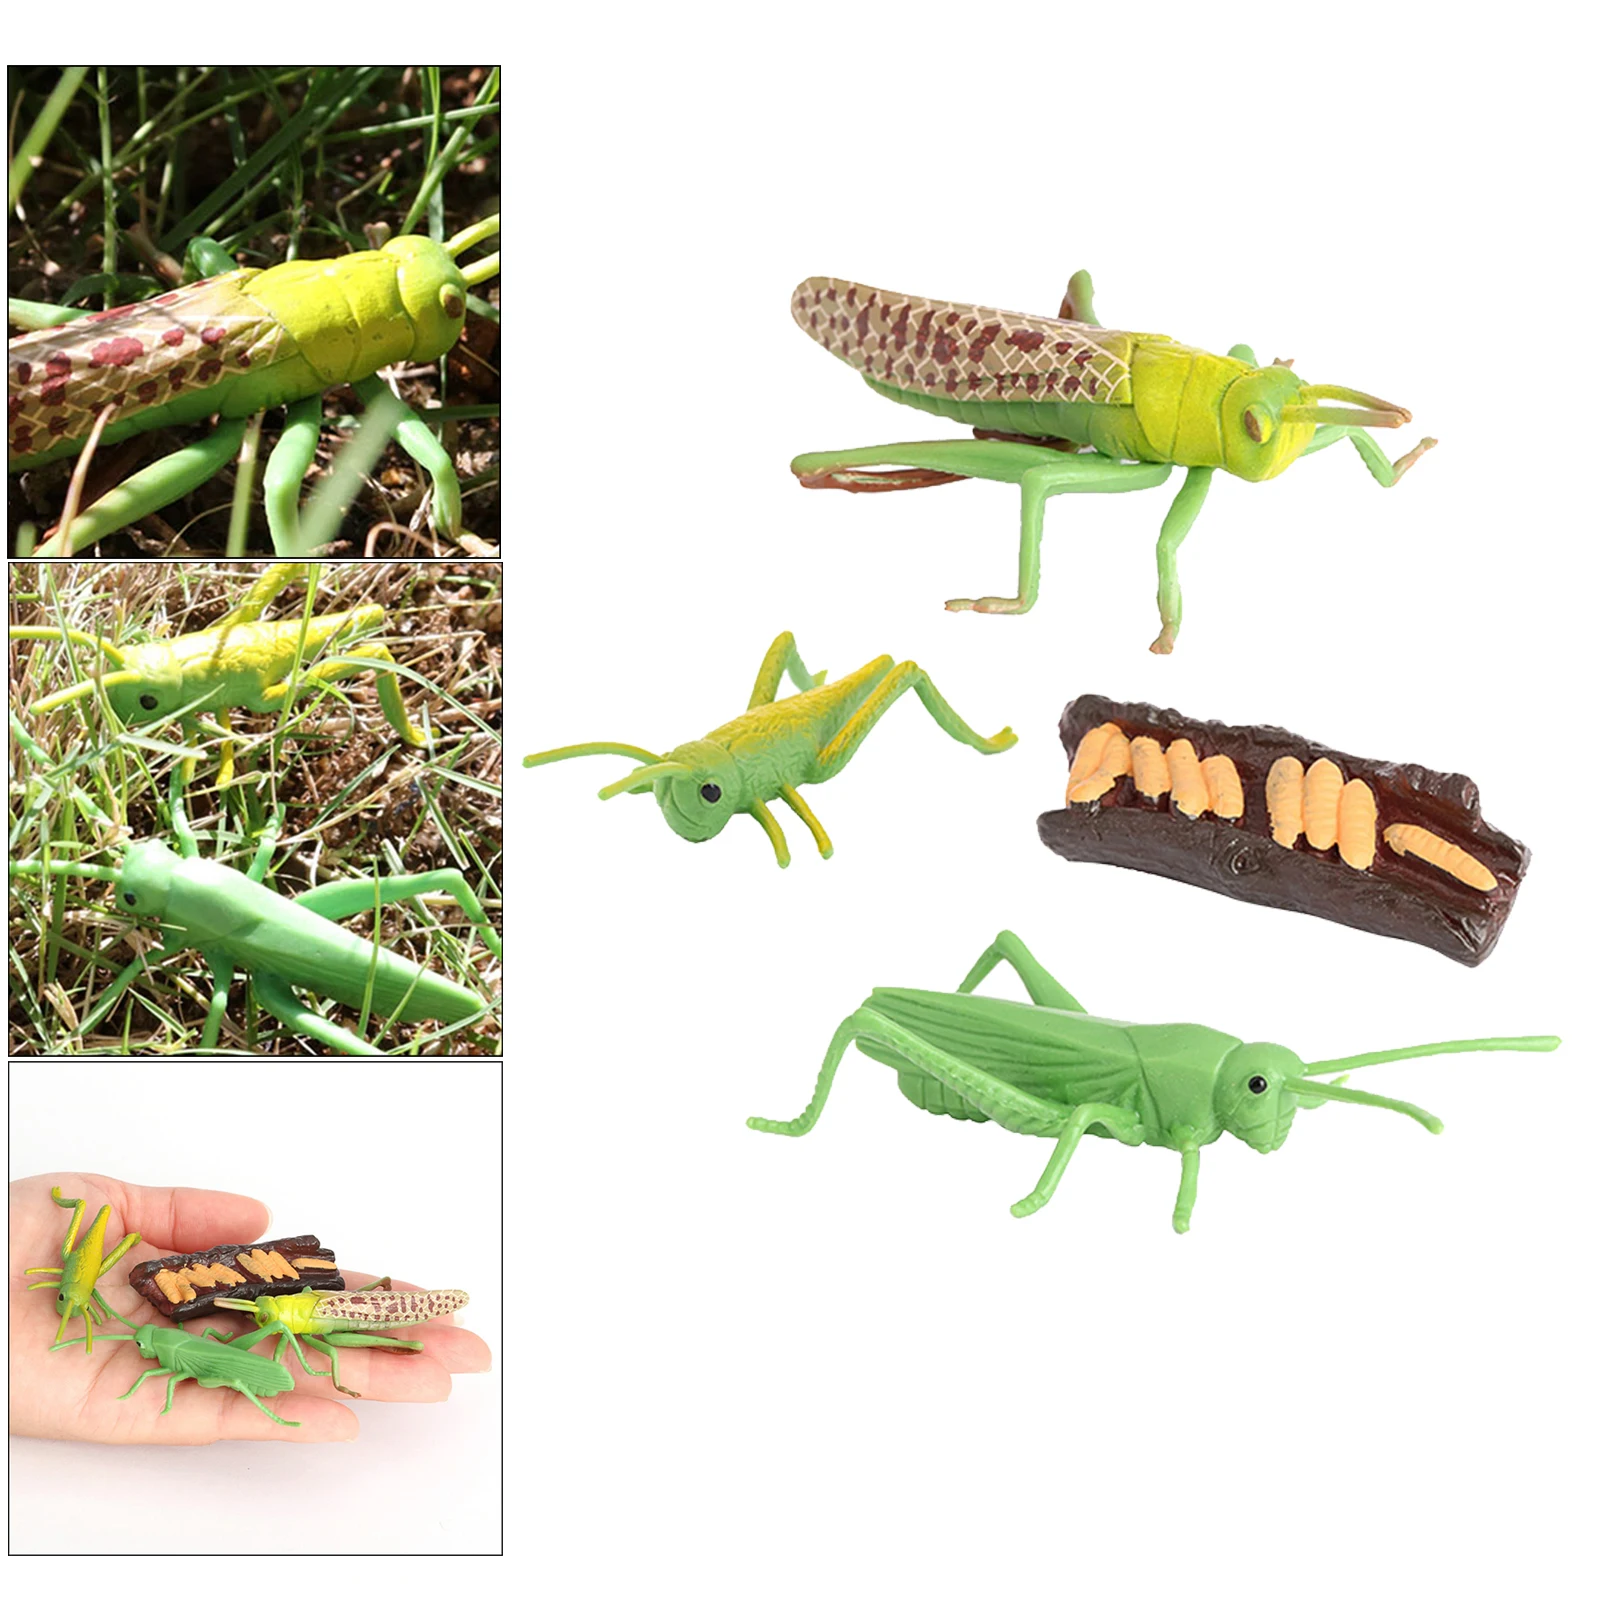 Nature Grasshopper Growth Life Cycle Playset Pre-school Education Learning